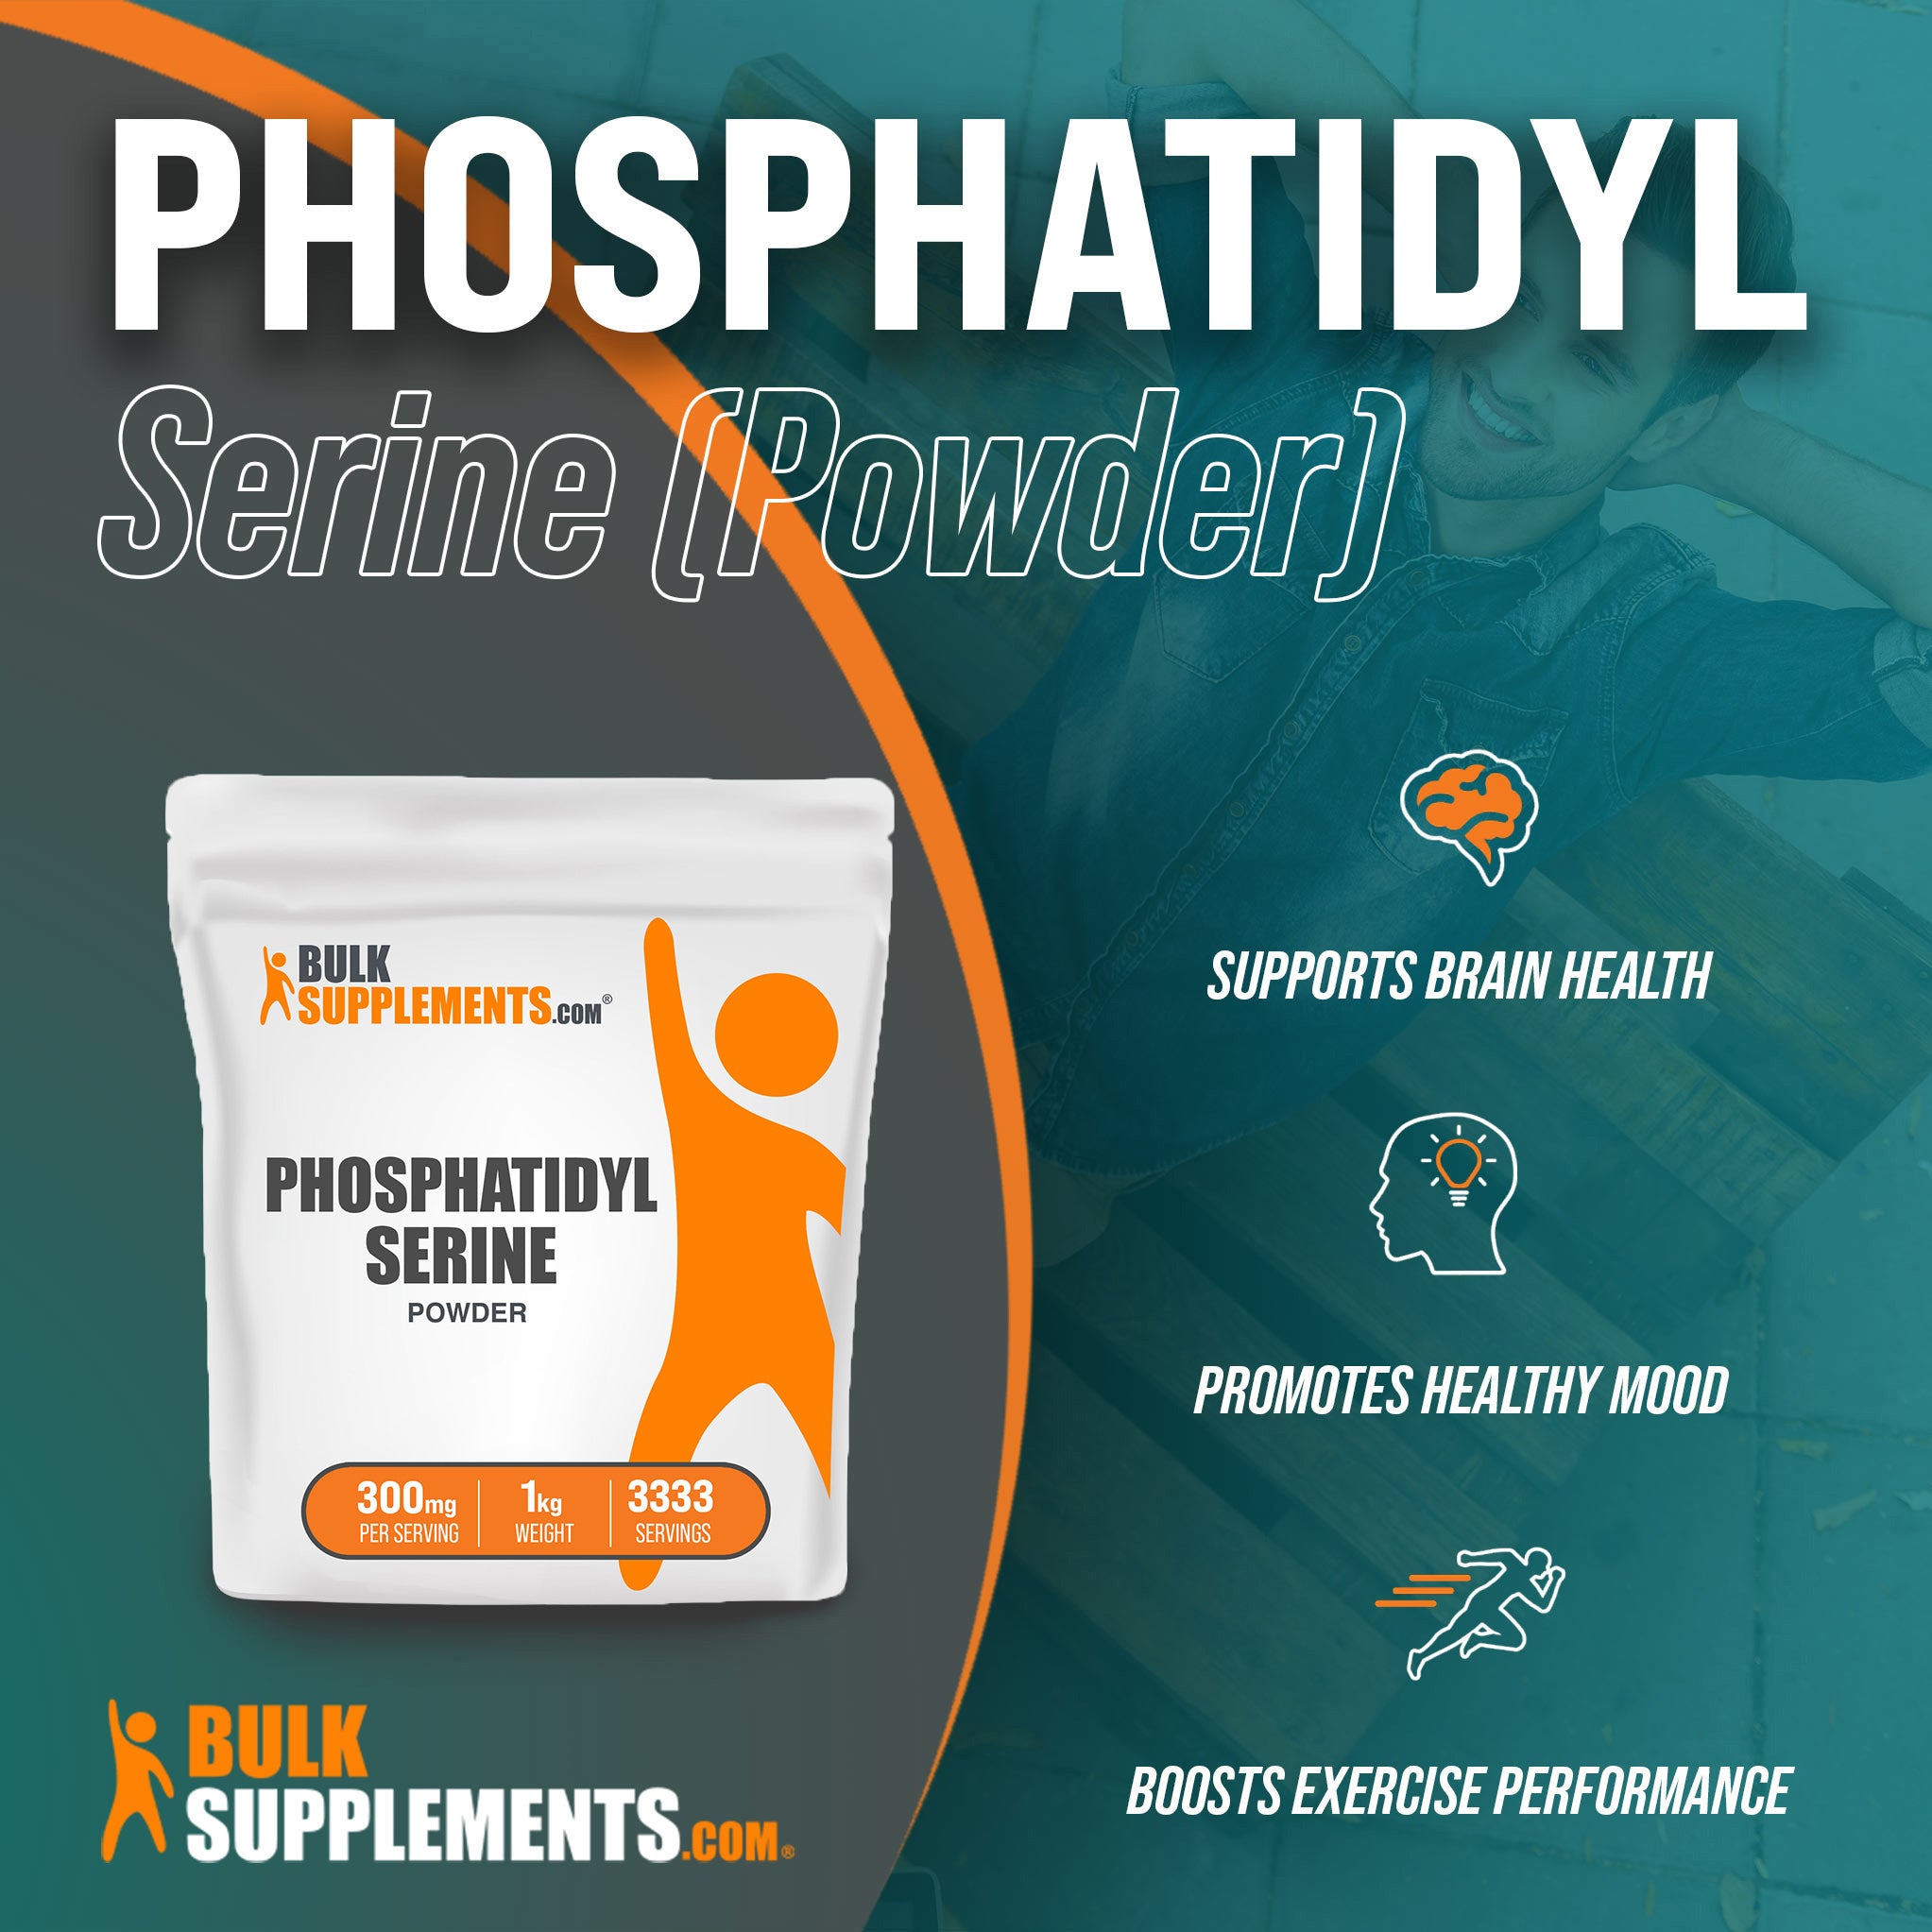 Benefits of Phosphatidylserine: supports brain health, promotes healthy mood, boosts exercise performance